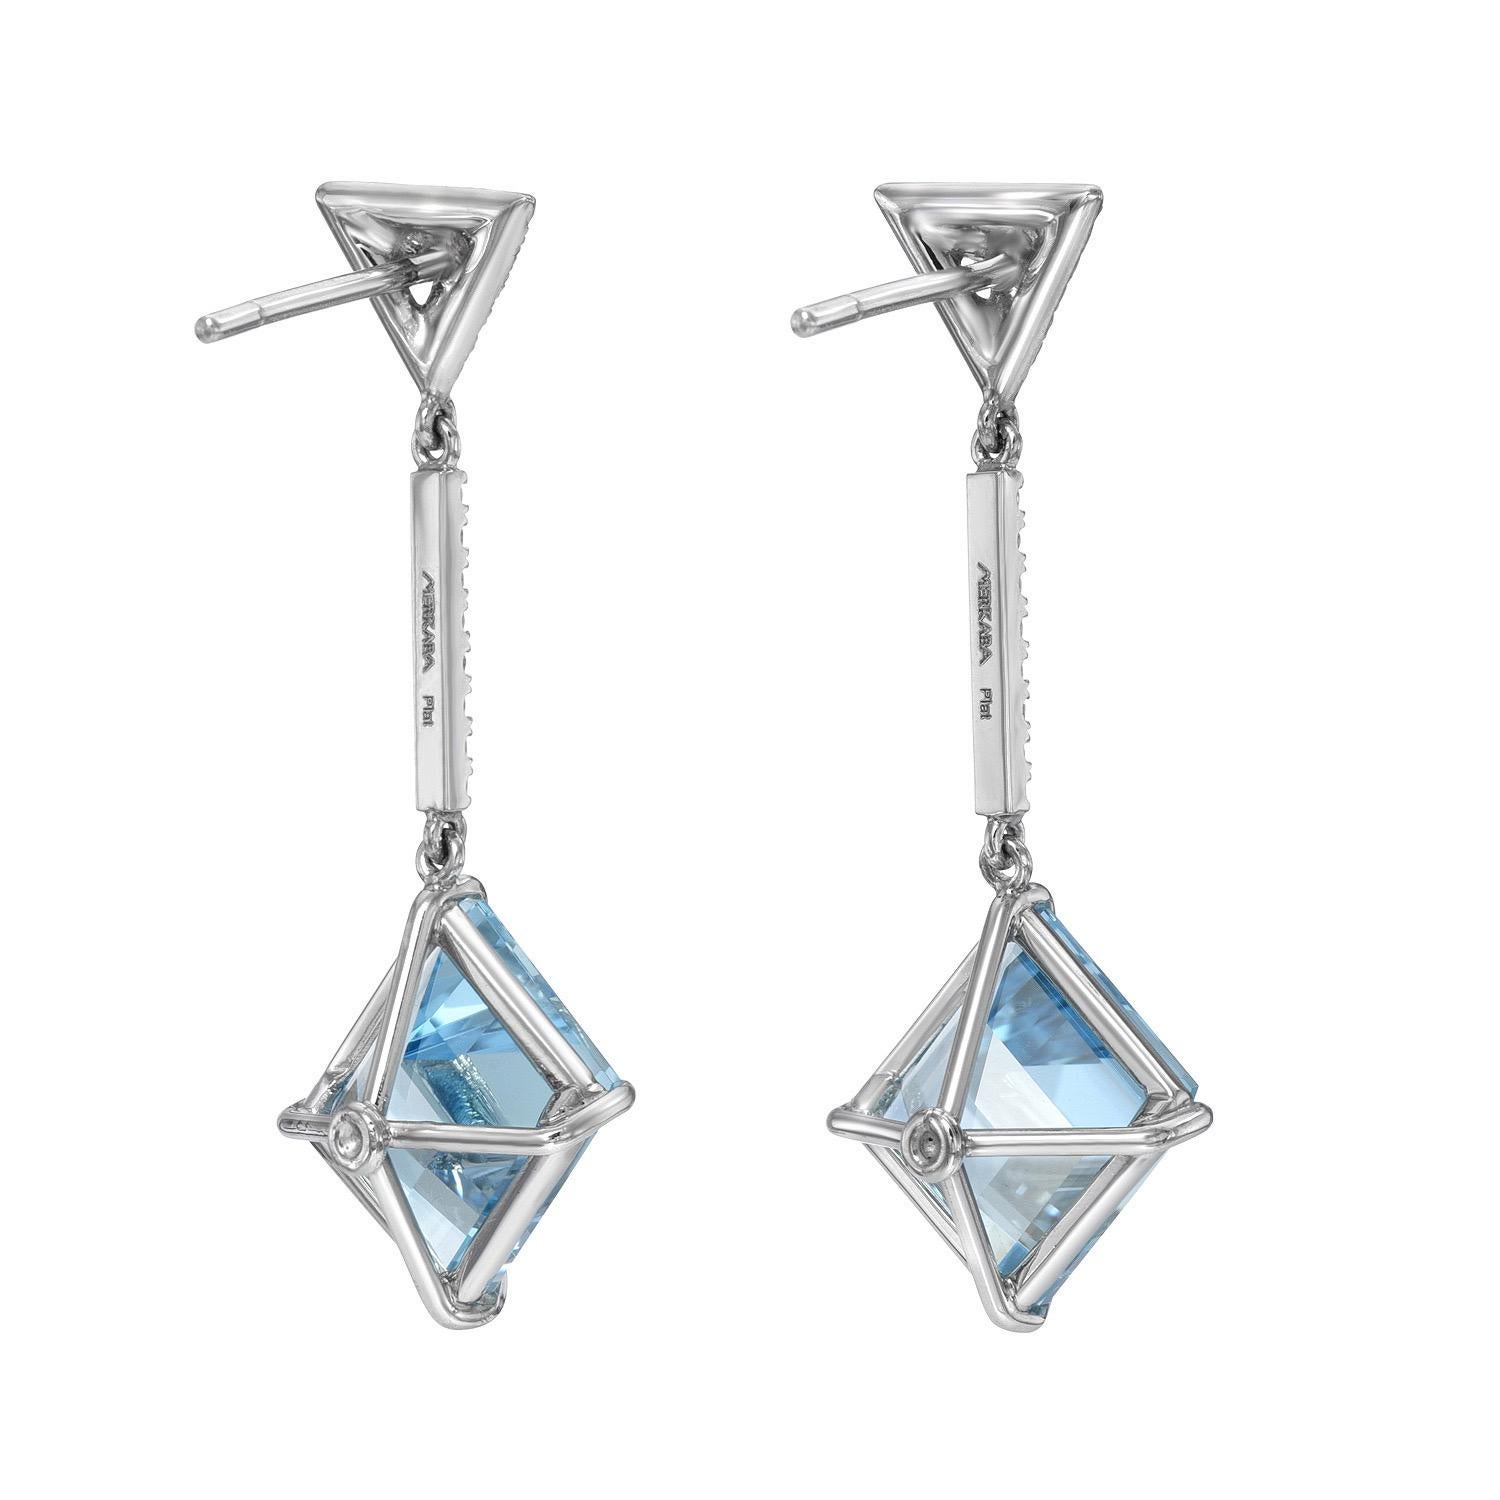 Exclusive 5.87 carat Aquamarine kite shaped platinum earrings, decorated with a total of 0.34 carat round brilliant collection diamonds, suspending from our signature three dimensional triangle diamond studs.
Crafted by extremely skilled hands in